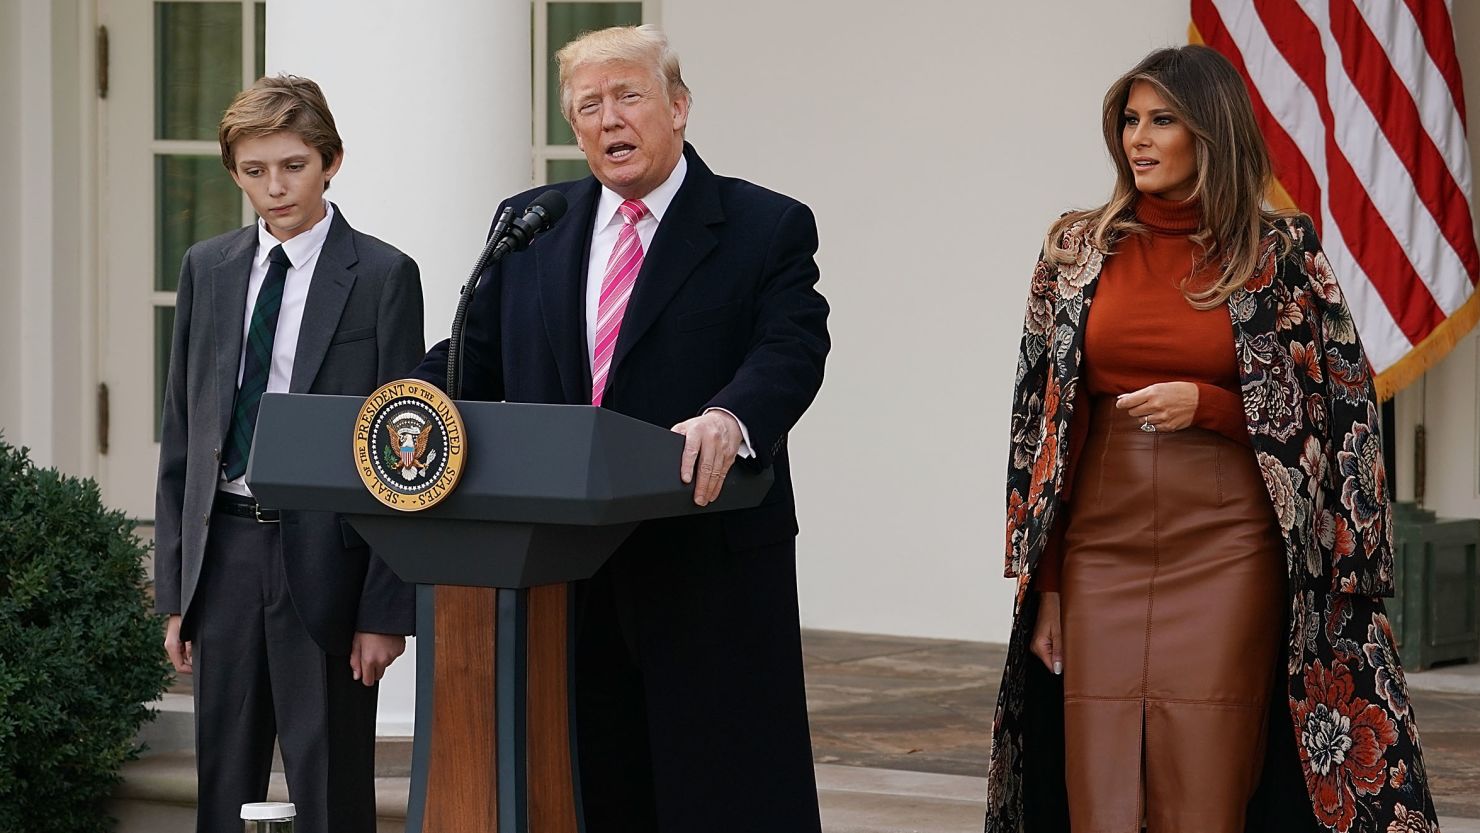 U.S. President Donald Trump delivers remarks with his son Barron Trump and first lady Melania Trump before pardoning the National Thanksgiving Turkey in the Rose Garden at the White House November 21, 2017 in Washington, DC. 